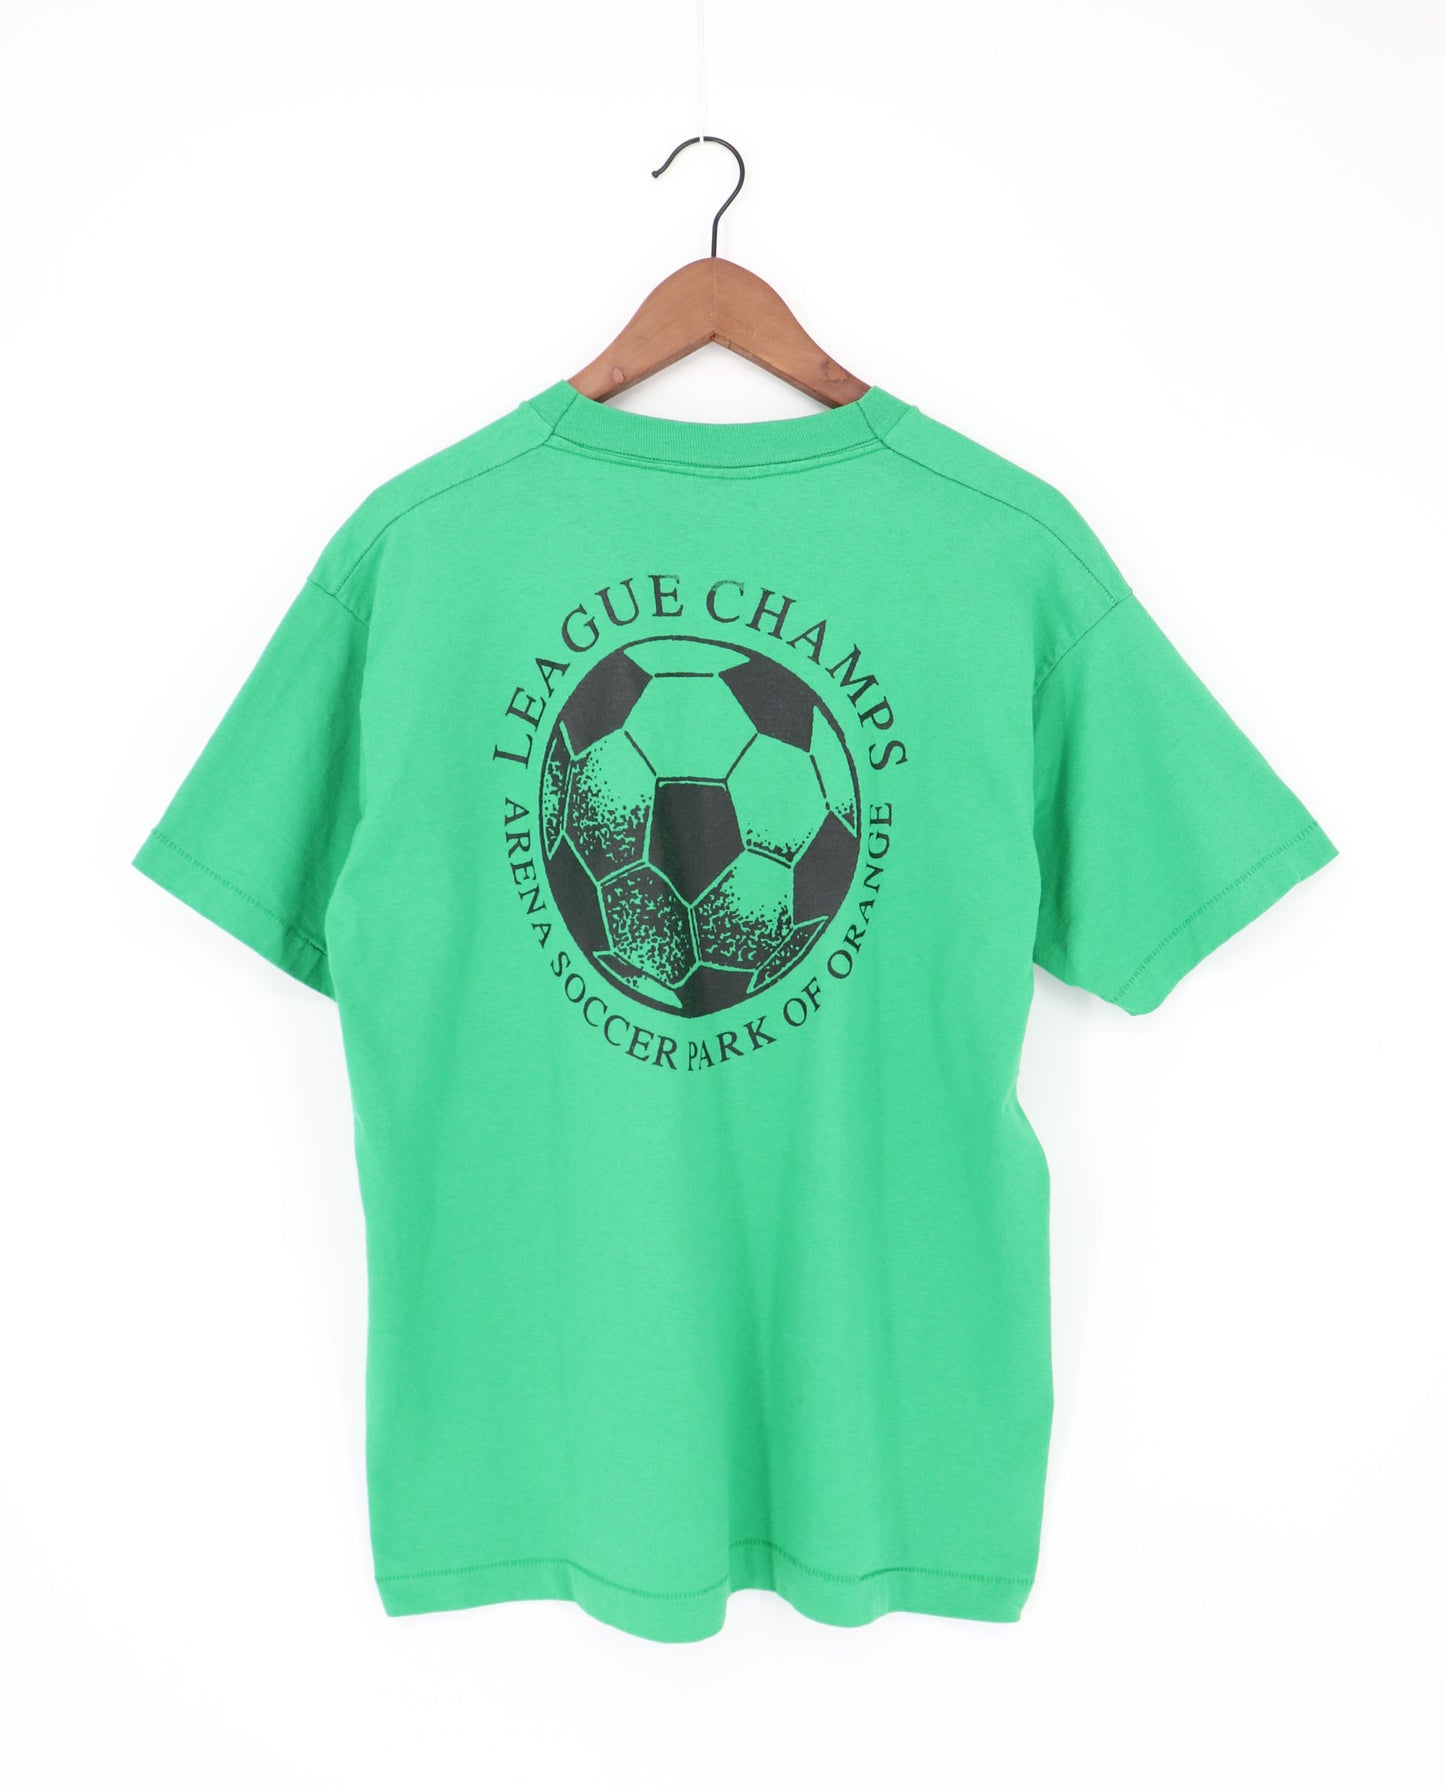 SOCCER LEAGUE CHAMPS 1990s MADE IN USA